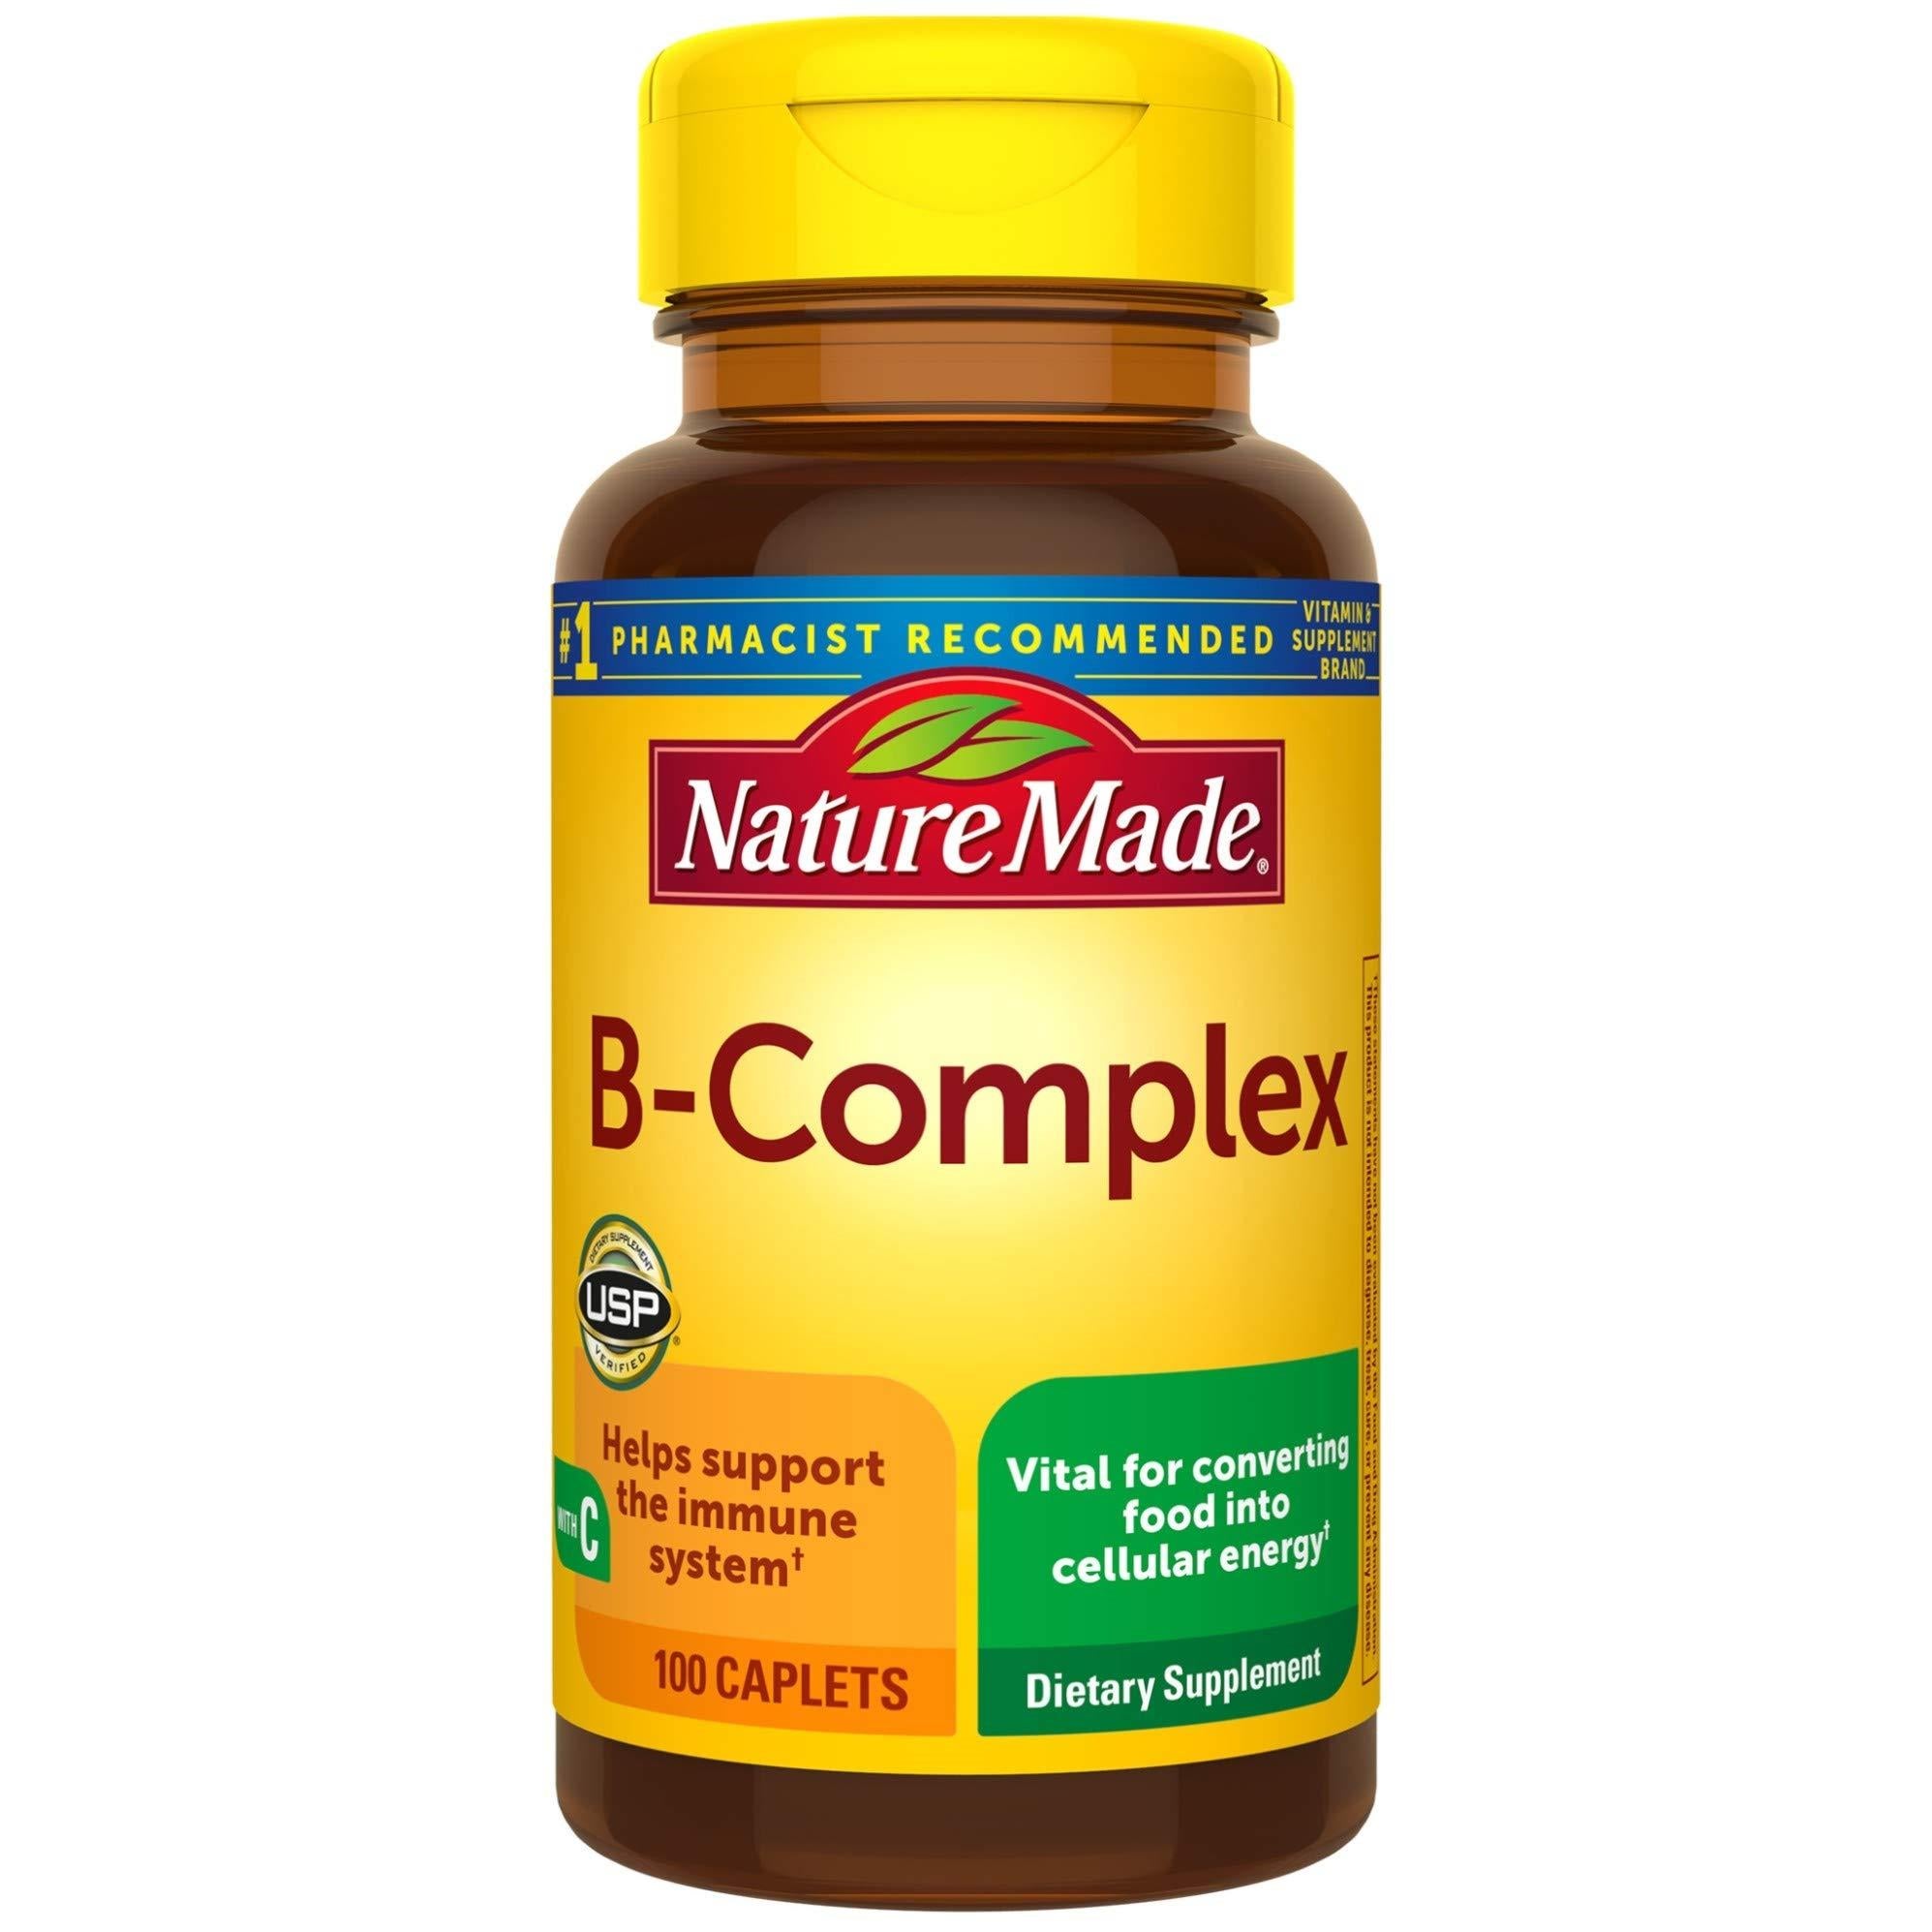 Nature Made B-Complex with Vitamin C Caplets, 100 Count (Pack of 3)